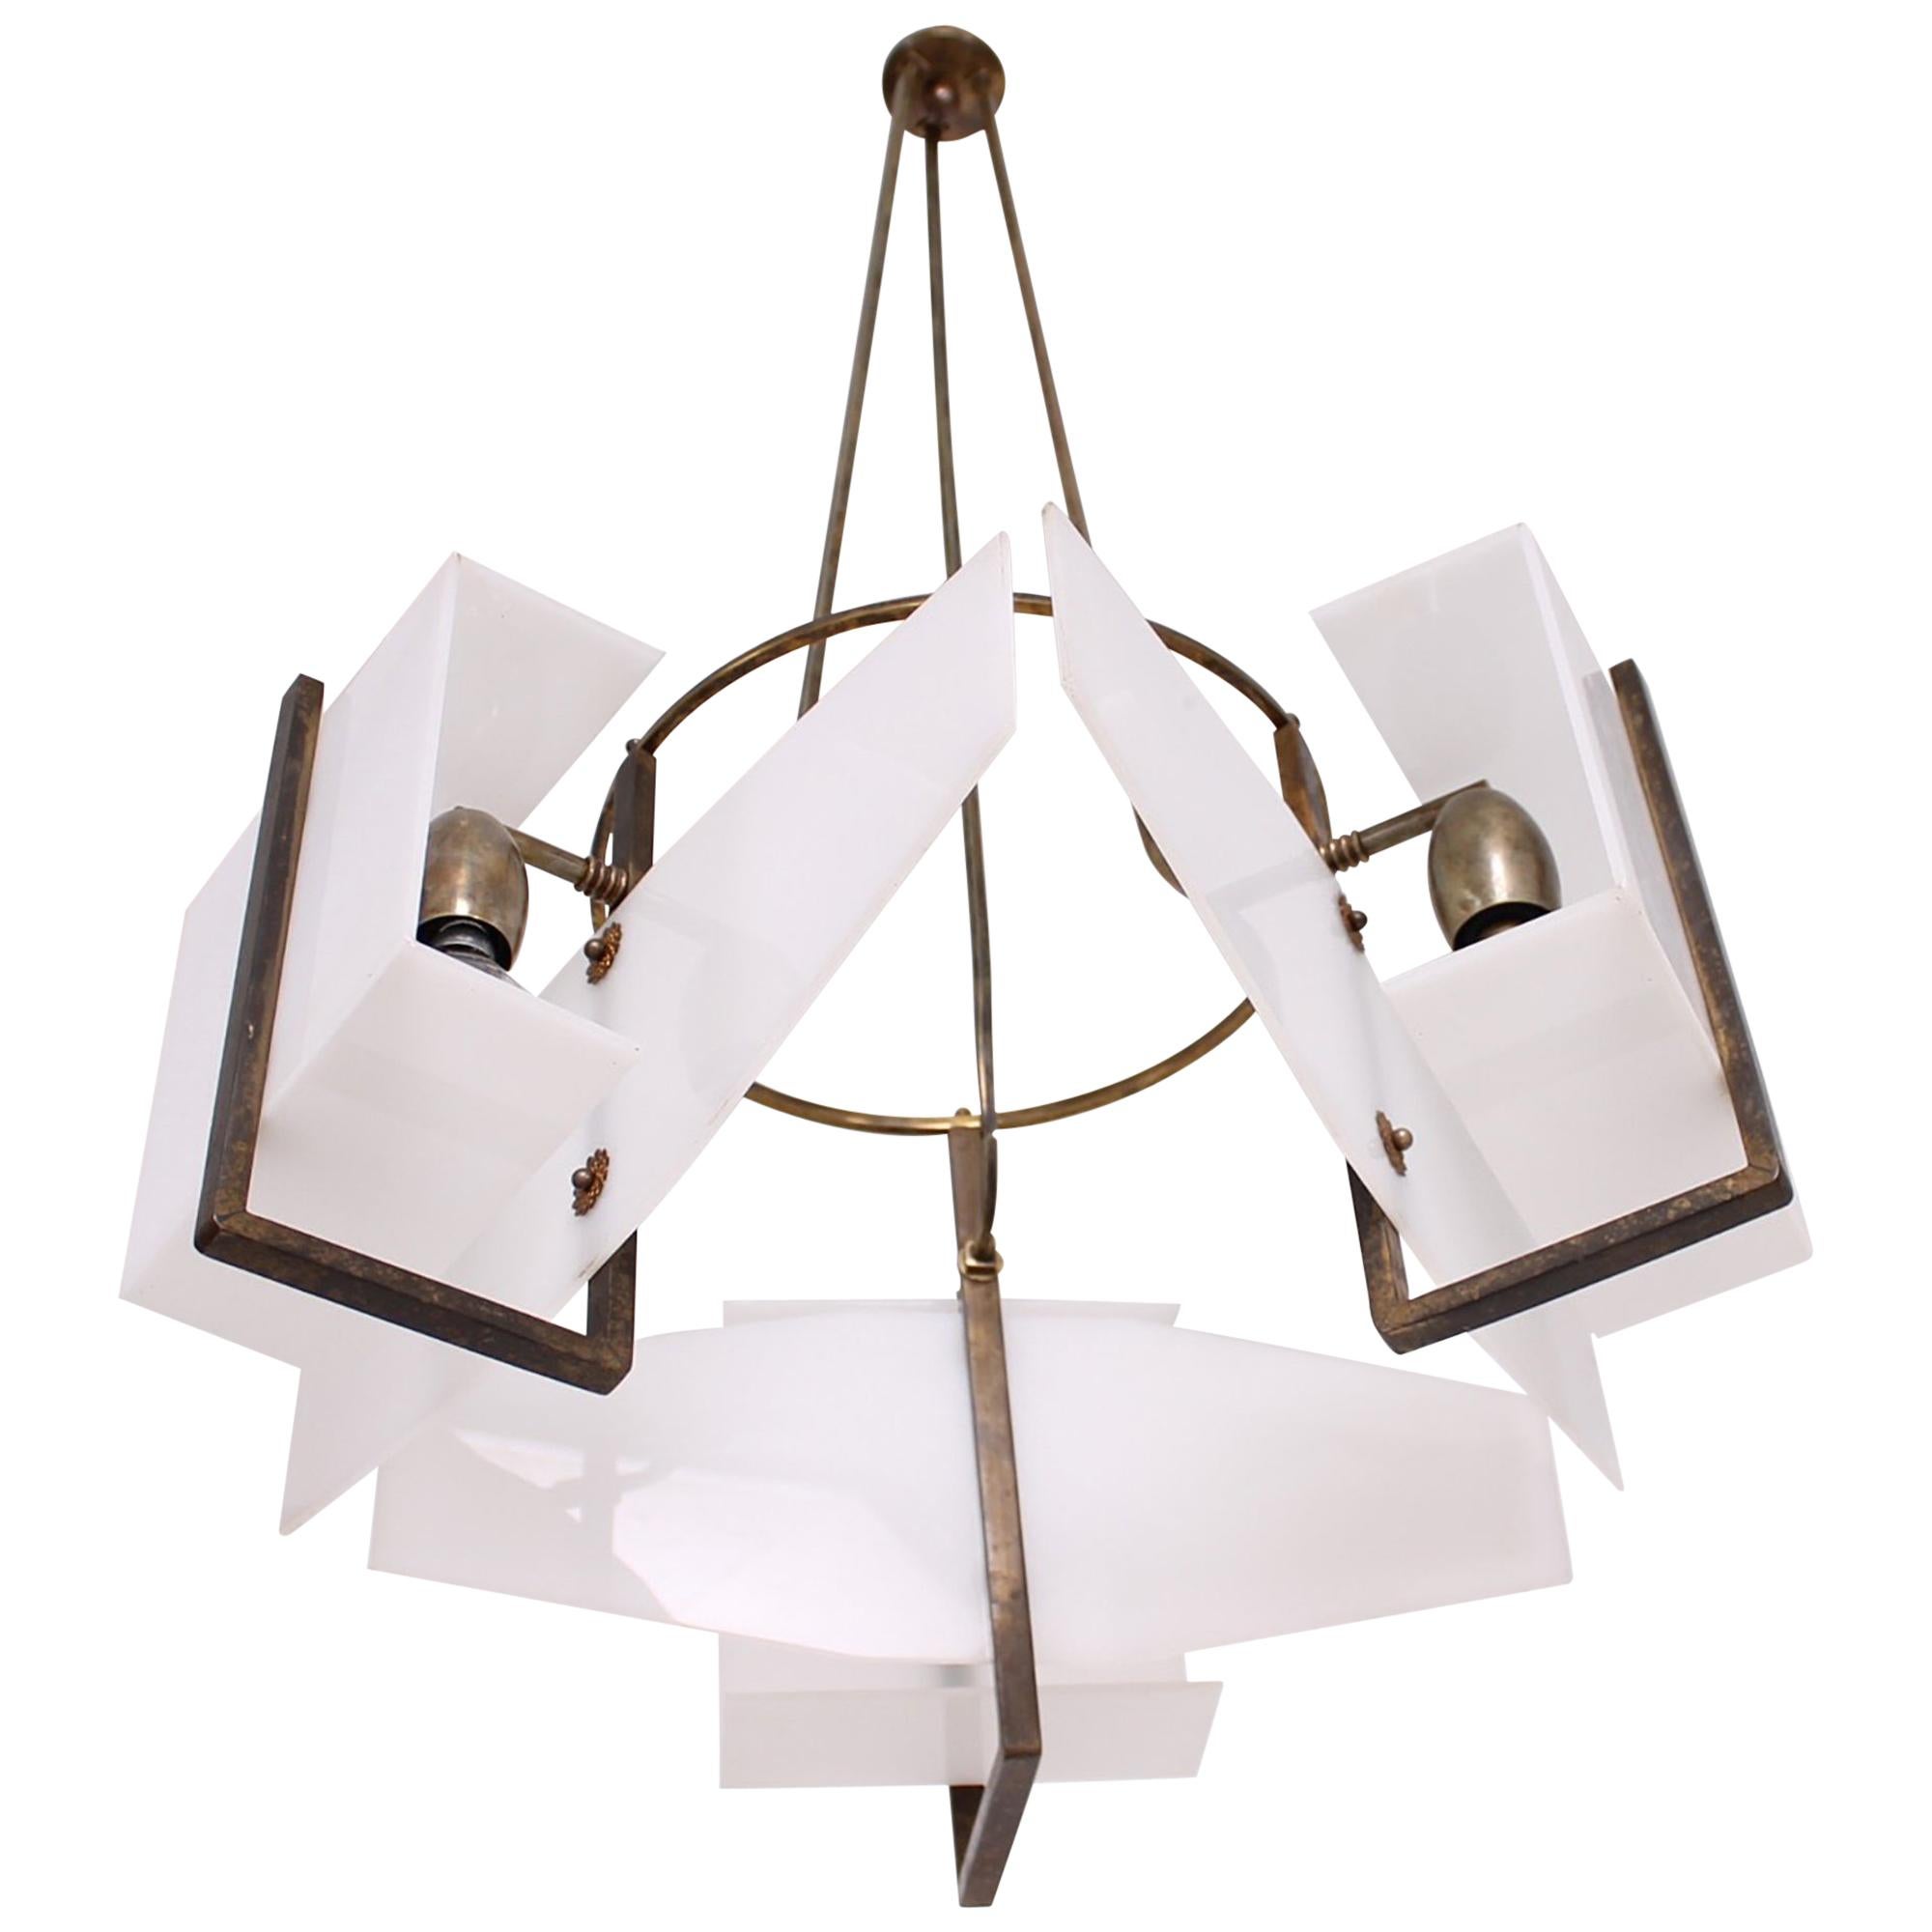 1950s Italy Modernist Patinated Brass & White Acrylic Chandelier Style of OLUCE